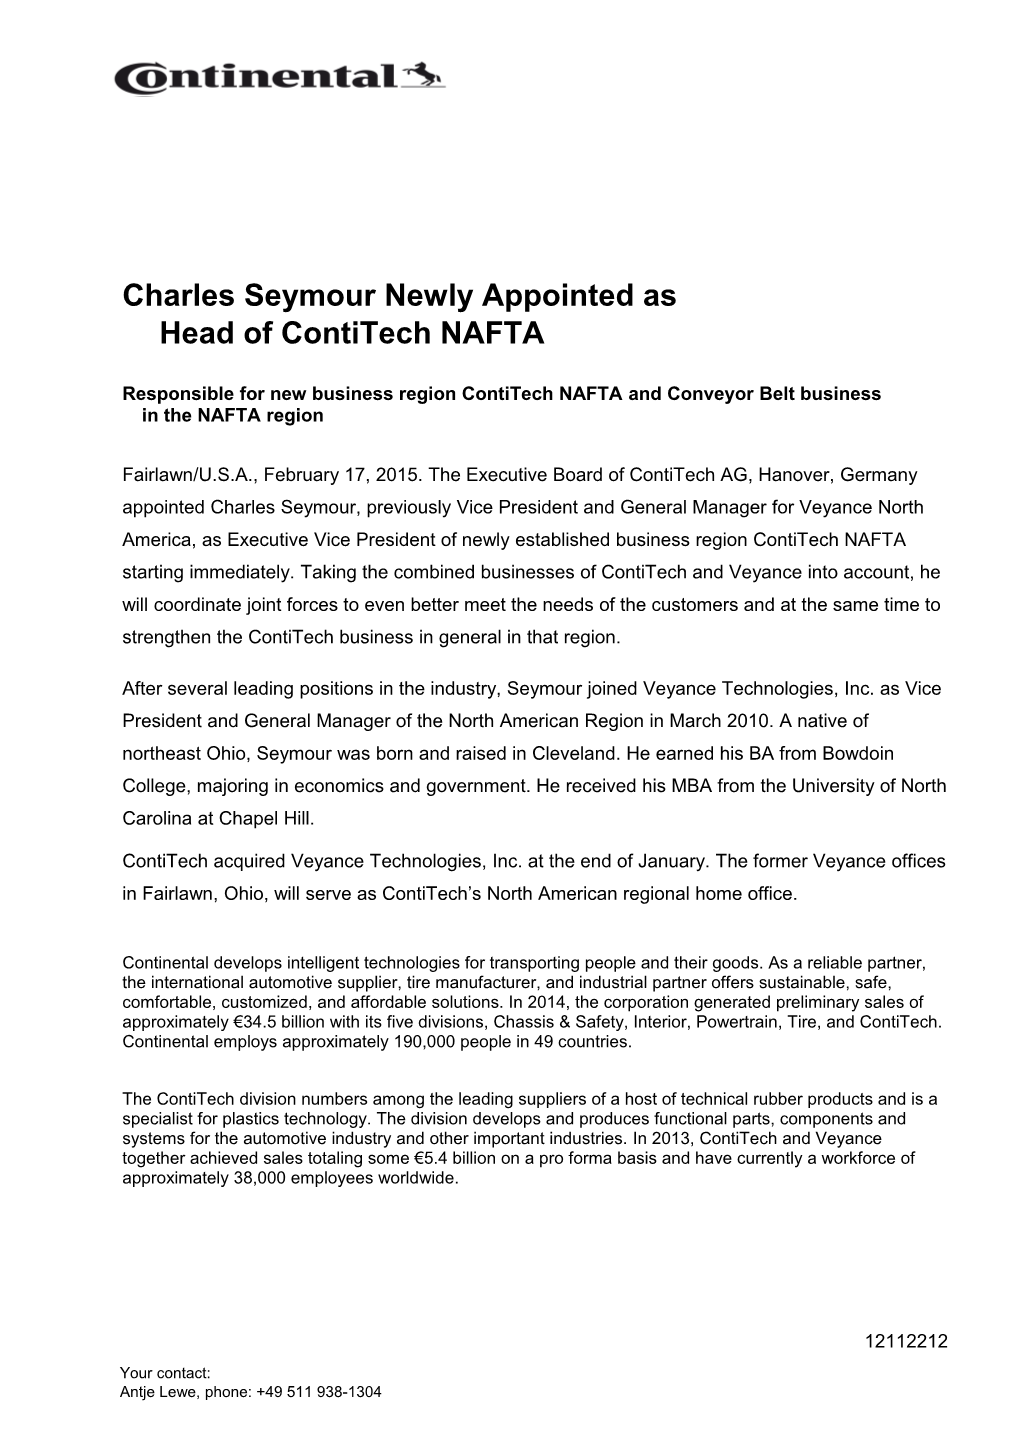 Charles Seymour Newly Appointed As Head of Contitech NAFTA